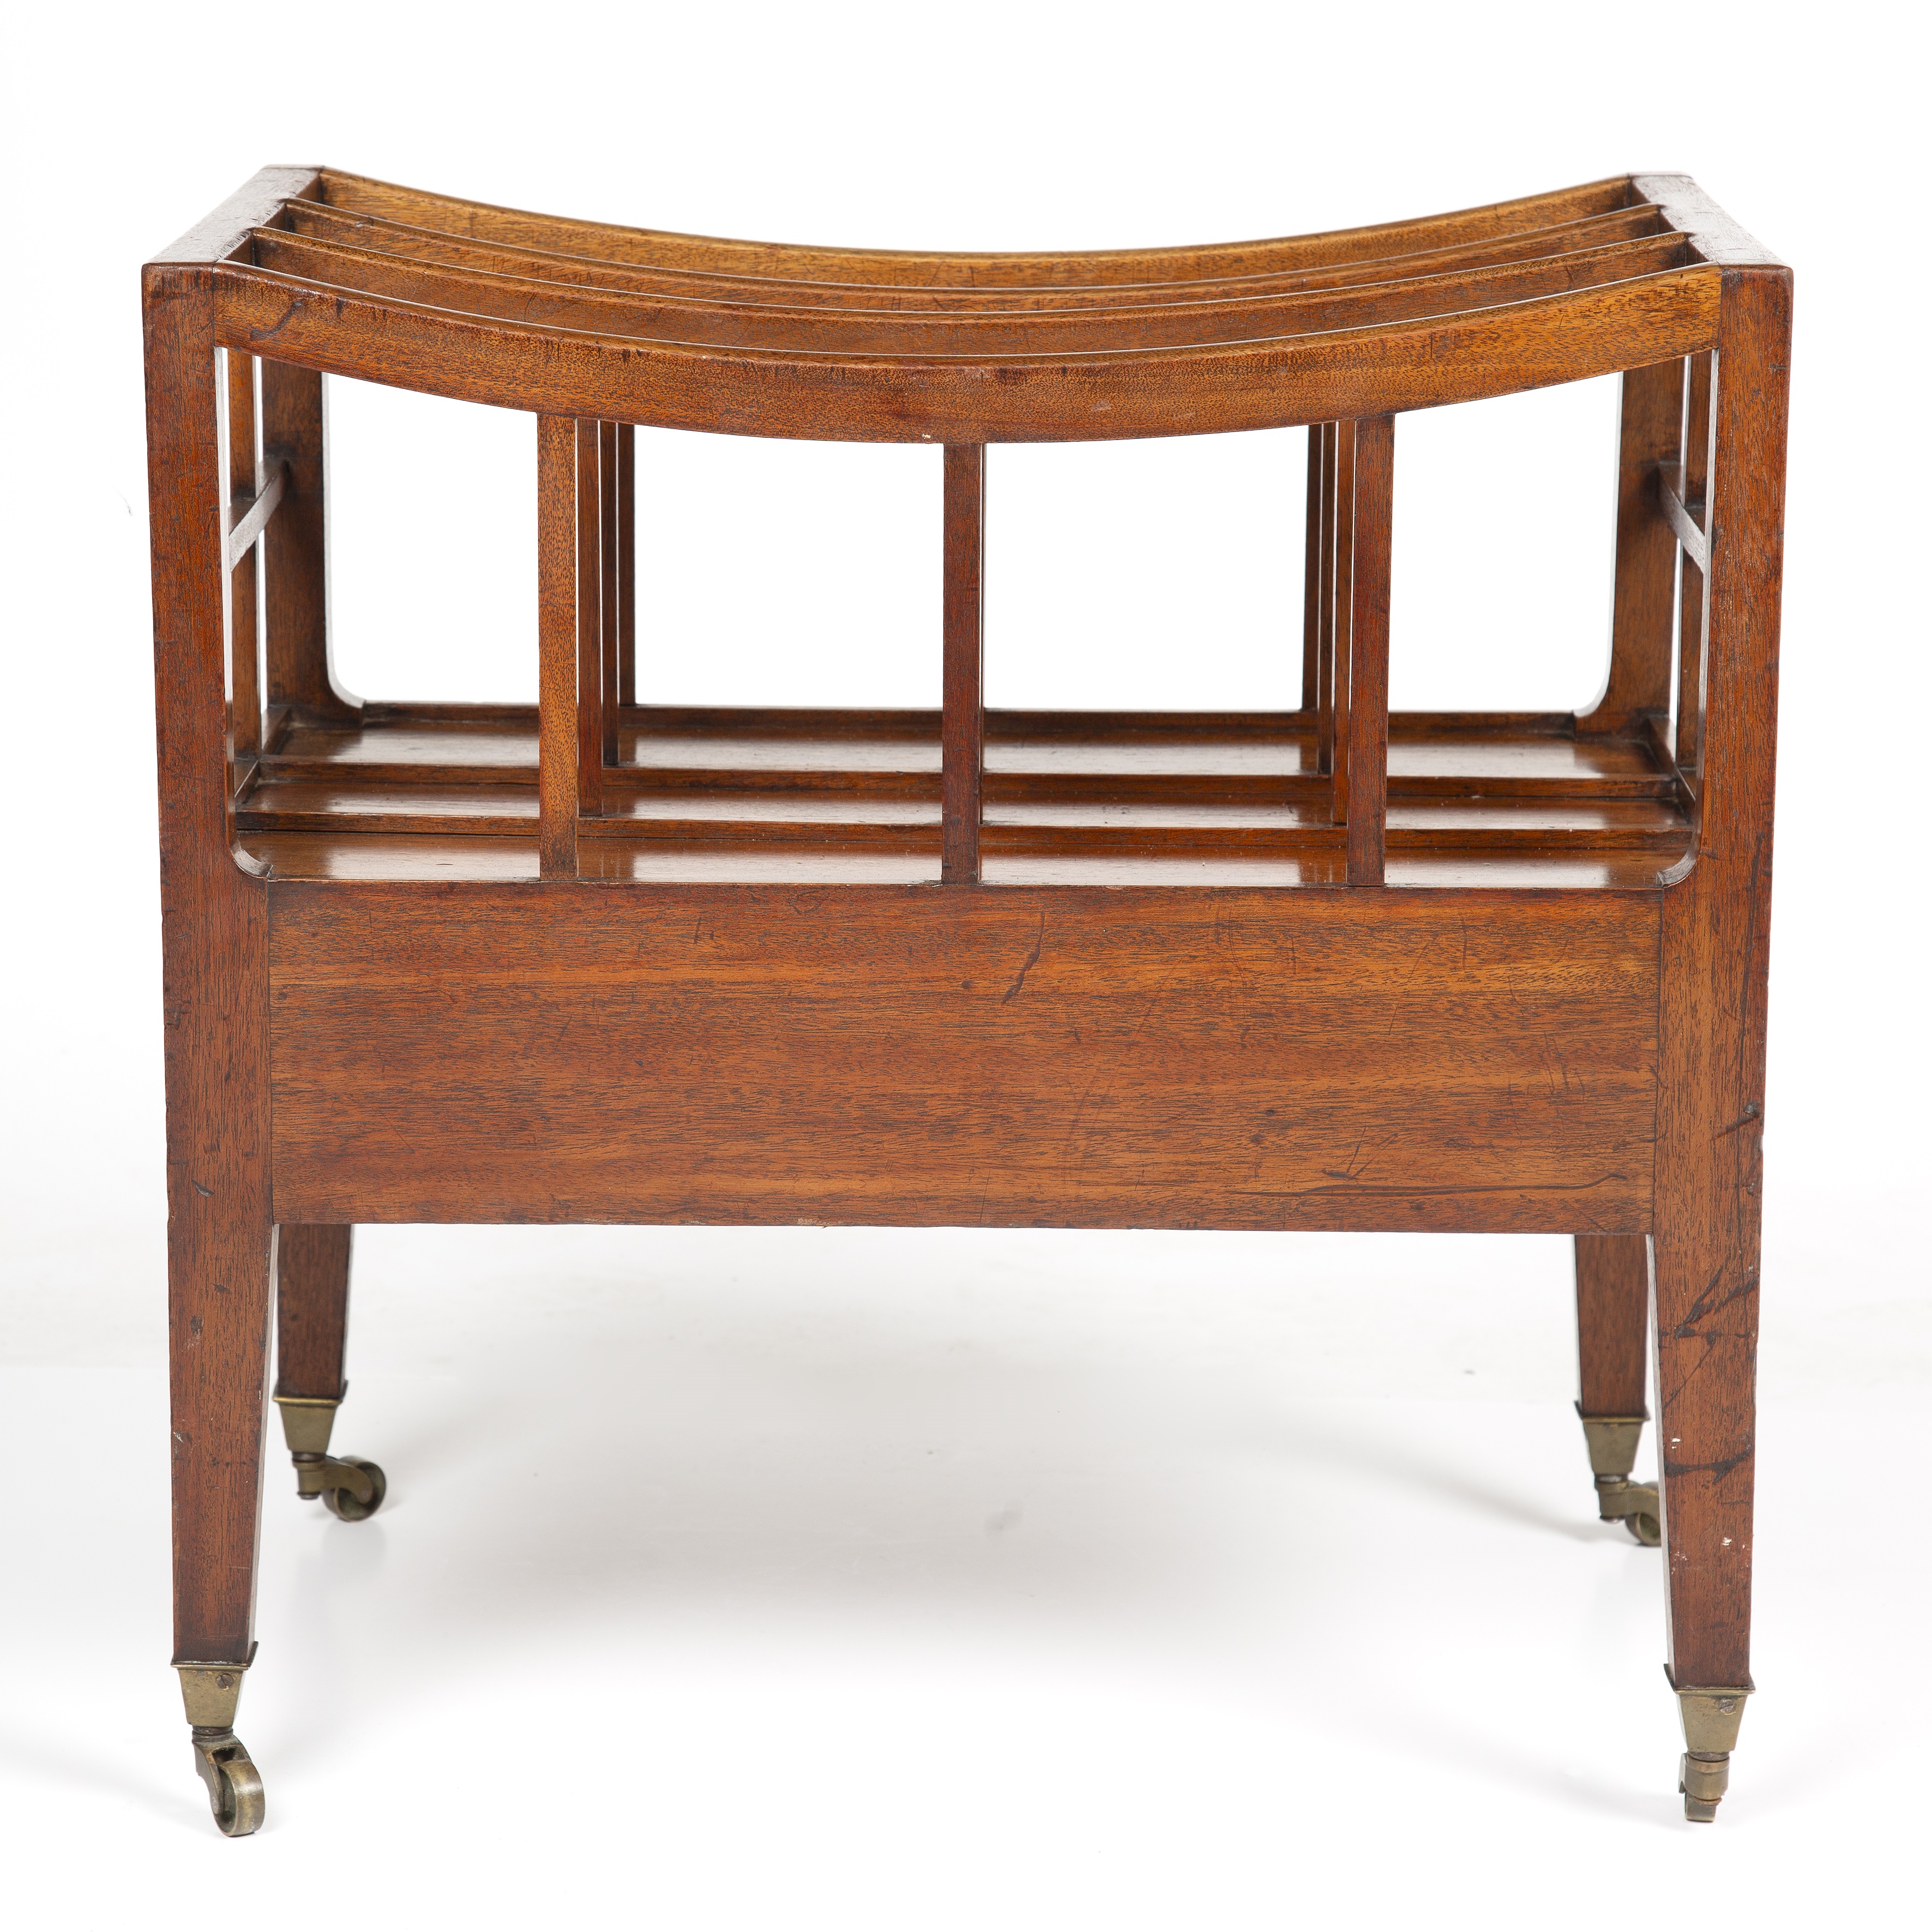 A Regency mahogany canterbury with four sections, a single drawer and square legs terminating in - Image 4 of 4